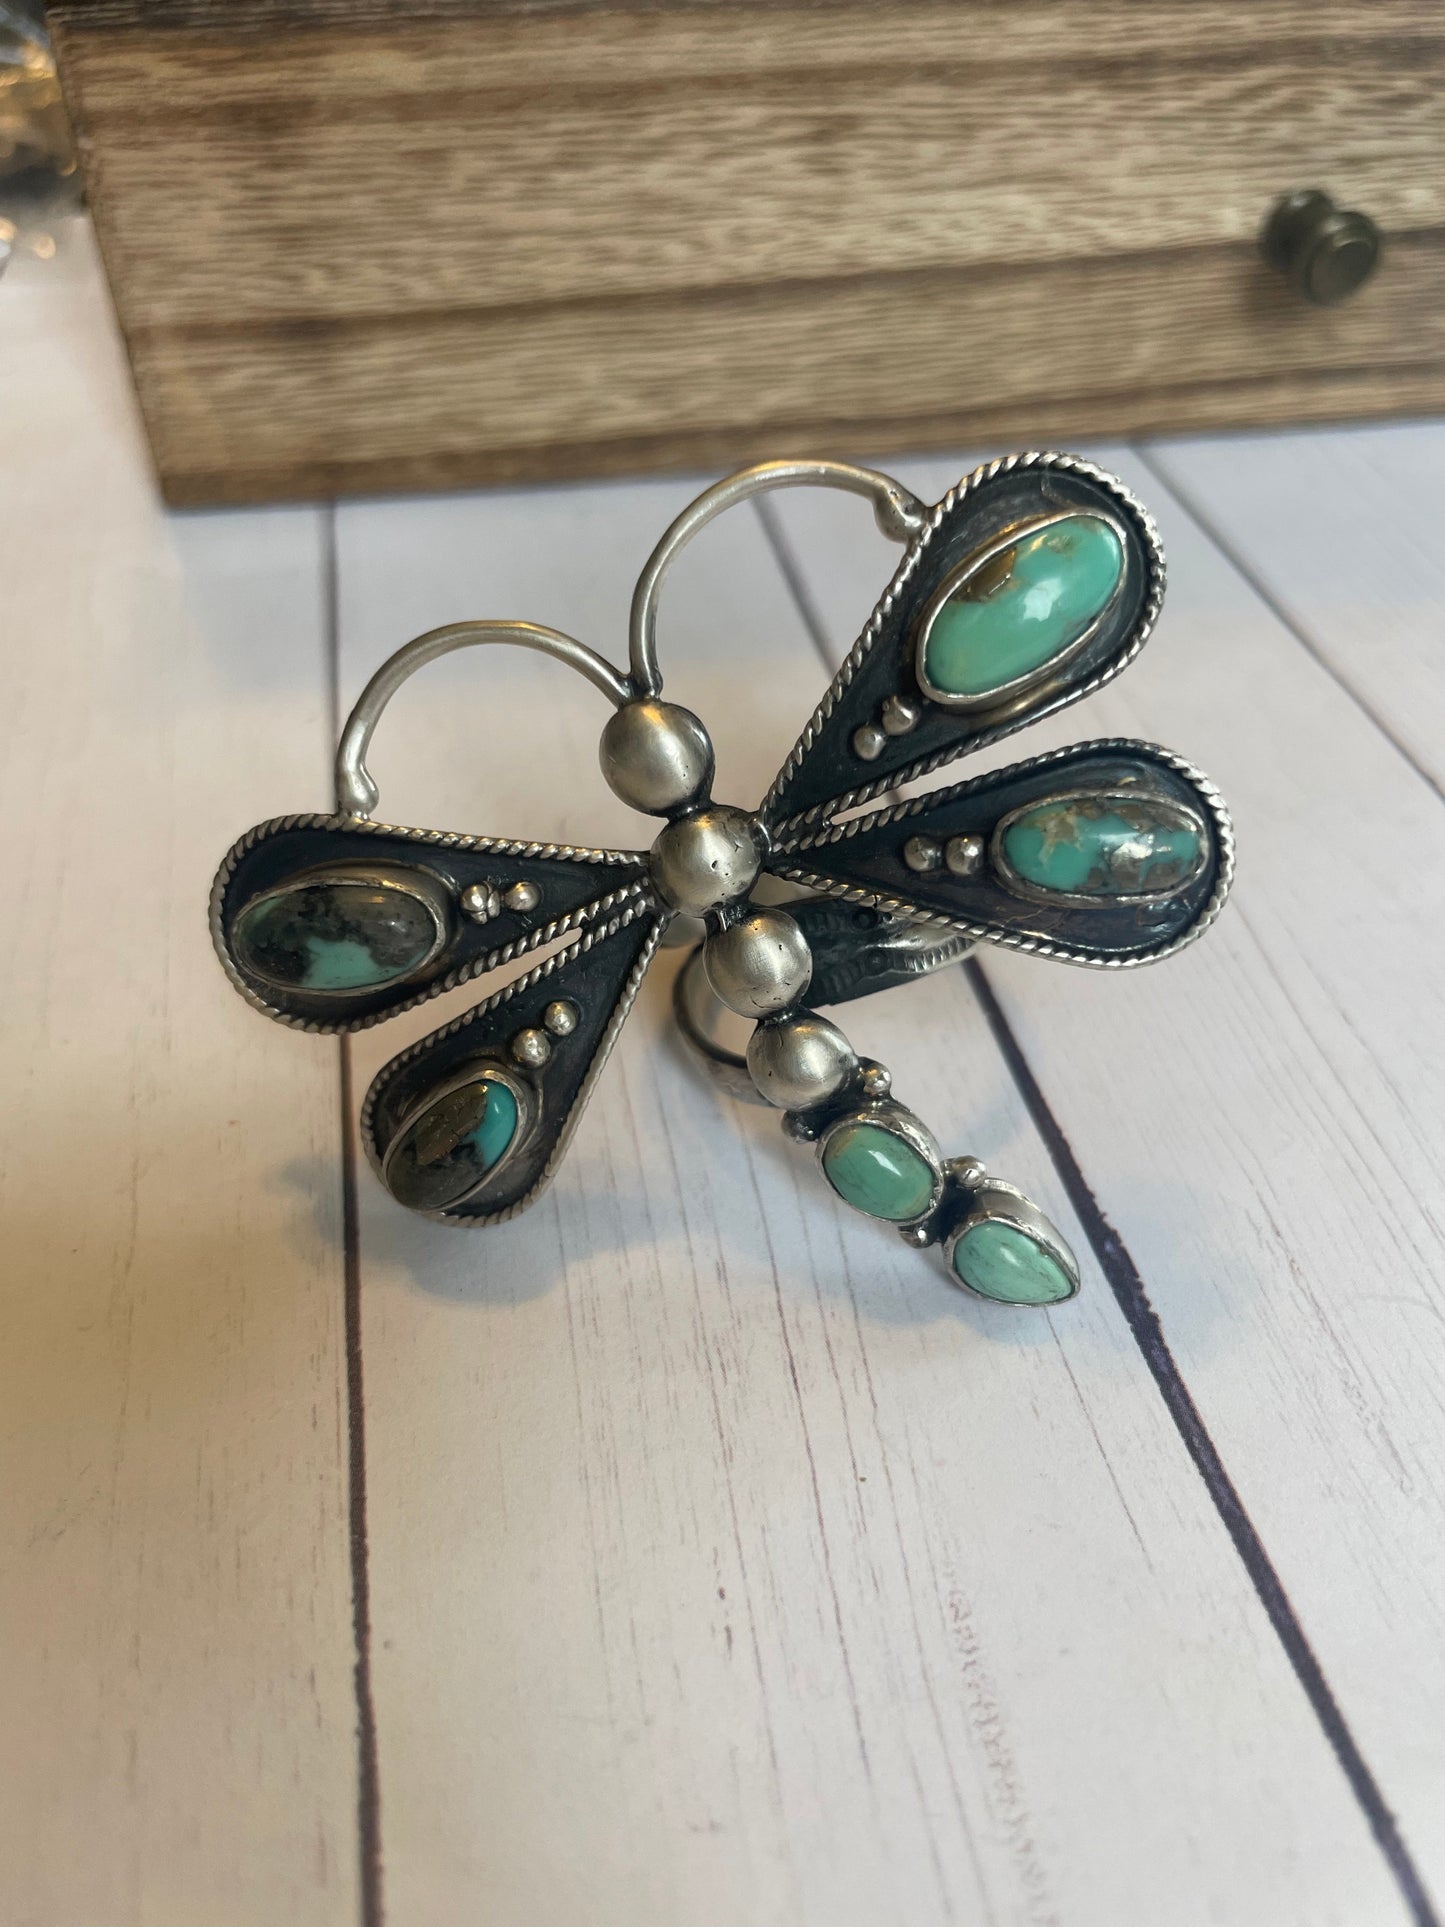 Handmade Sterling Silver & Turquoise Dragonfly Adjustable Ring Signed & Stamped